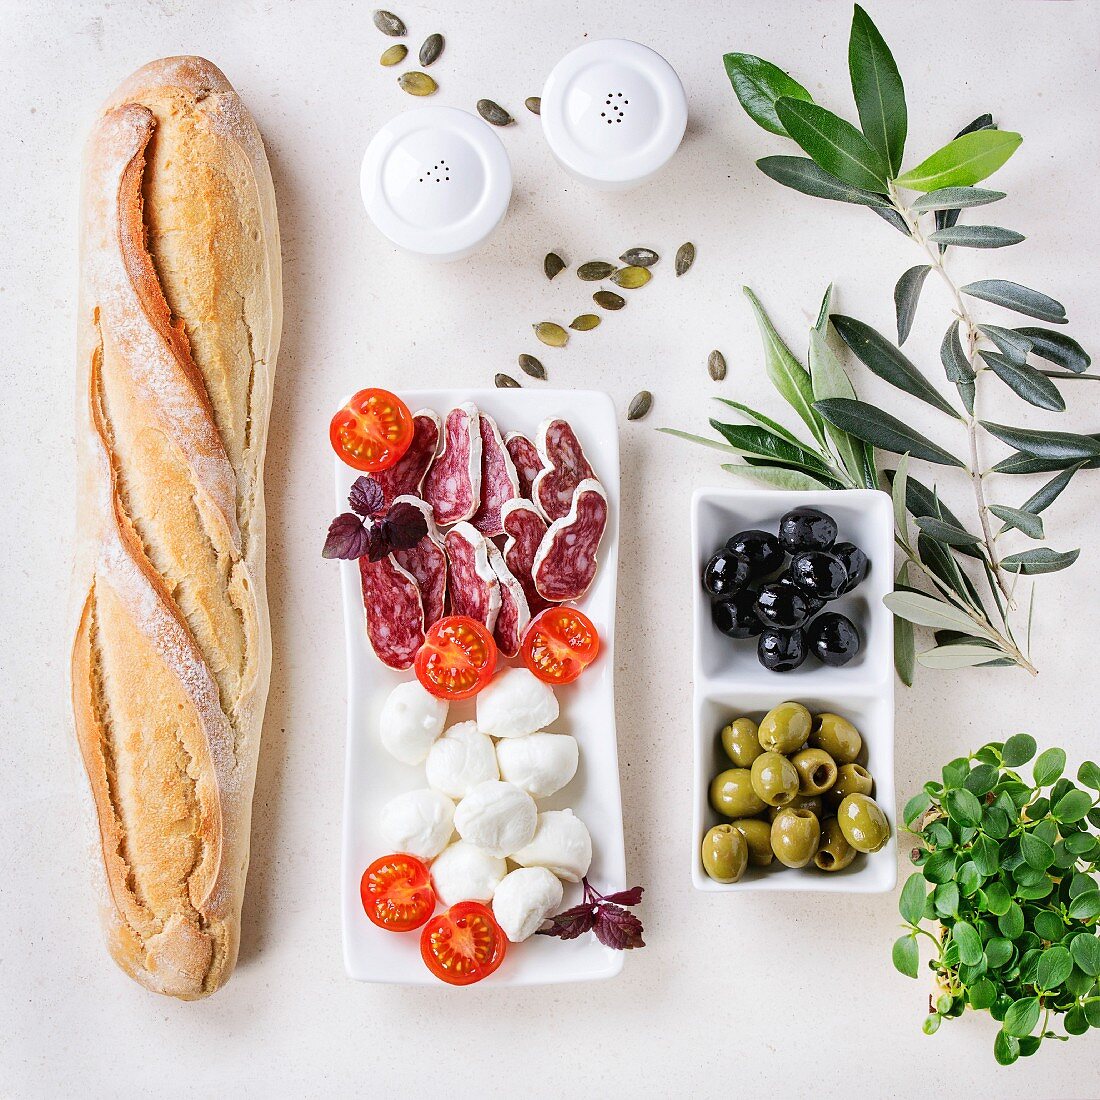 Antipasti Snack with green and balck olives, mozzarella cheese, sausage, tomatoes, fresh herbs and bread